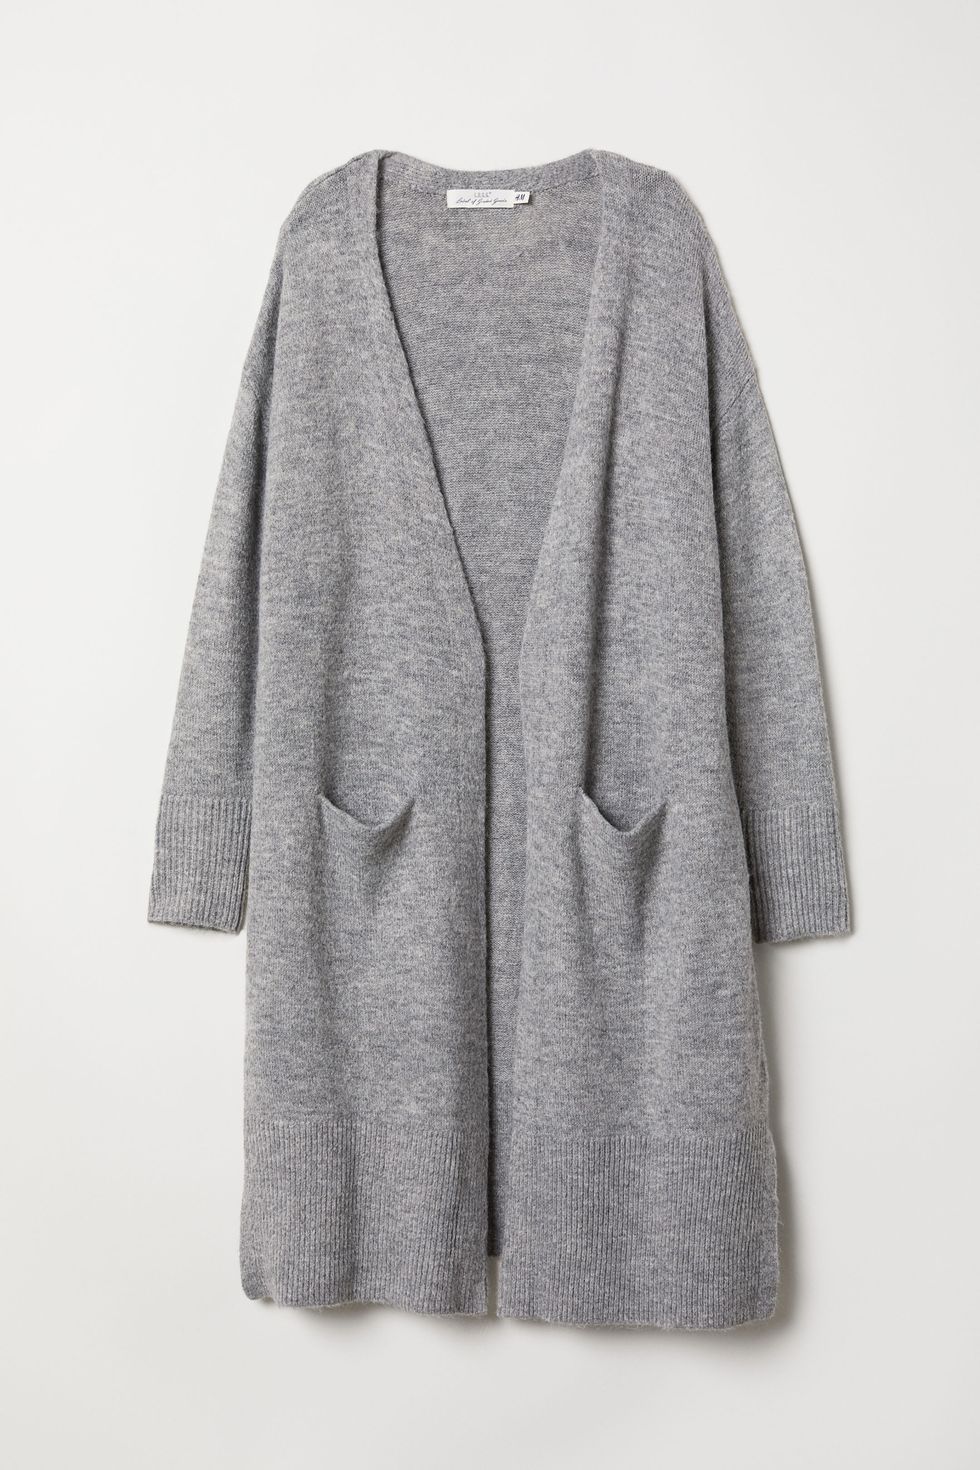 Clothing, Outerwear, Sleeve, Grey, Cardigan, Sweater, Pocket, Top, Robe, 